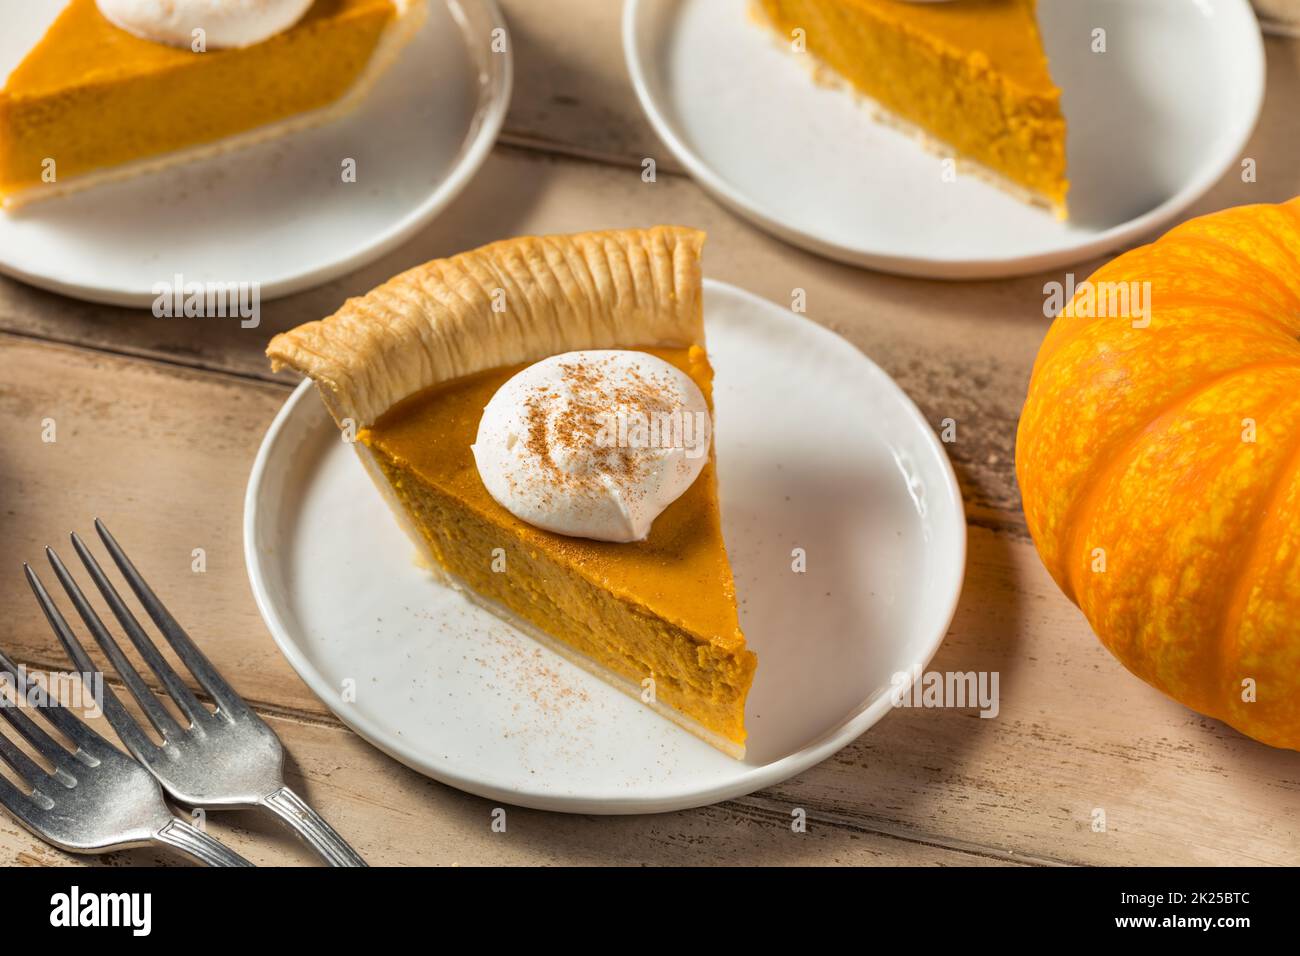 Homemade Thanksgiving Pumpkin Pie with Whipped Cream and Spice Stock Photo